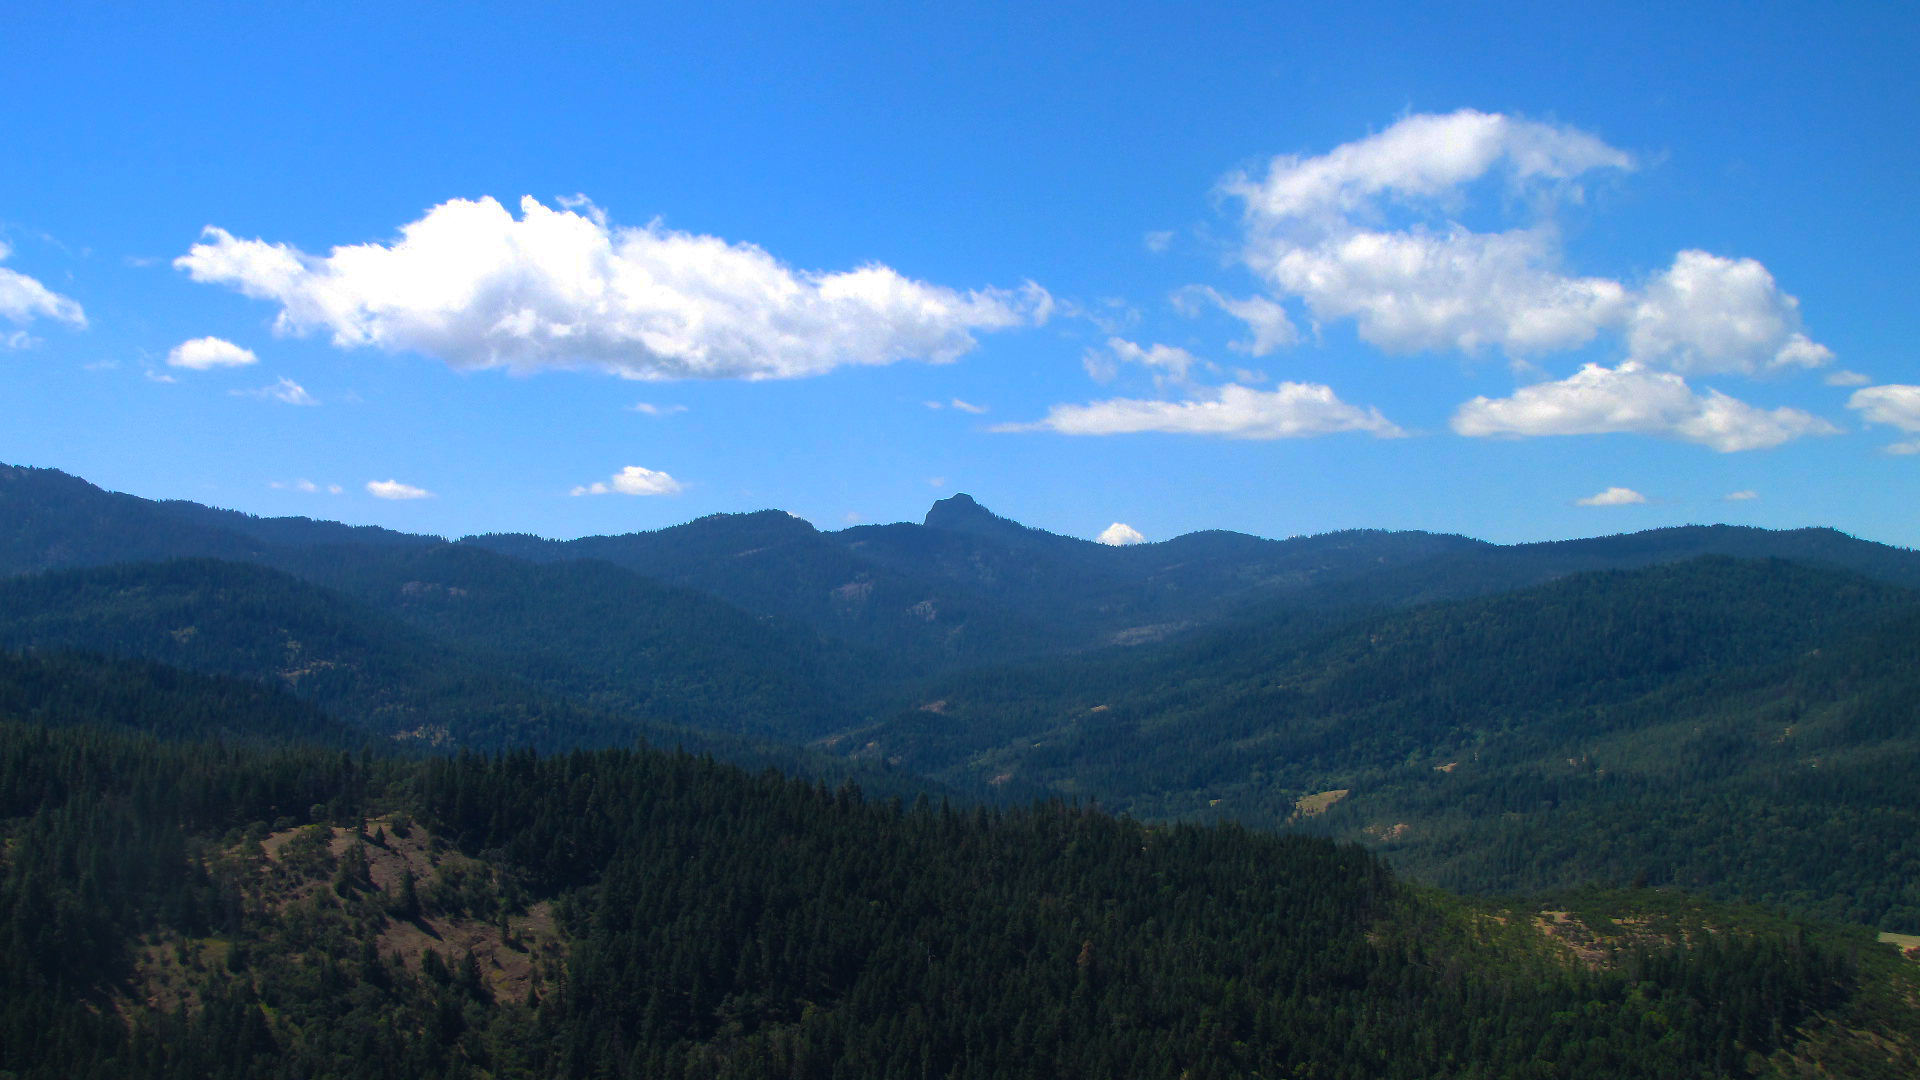 a distant view of a mountain range with trees on both sides